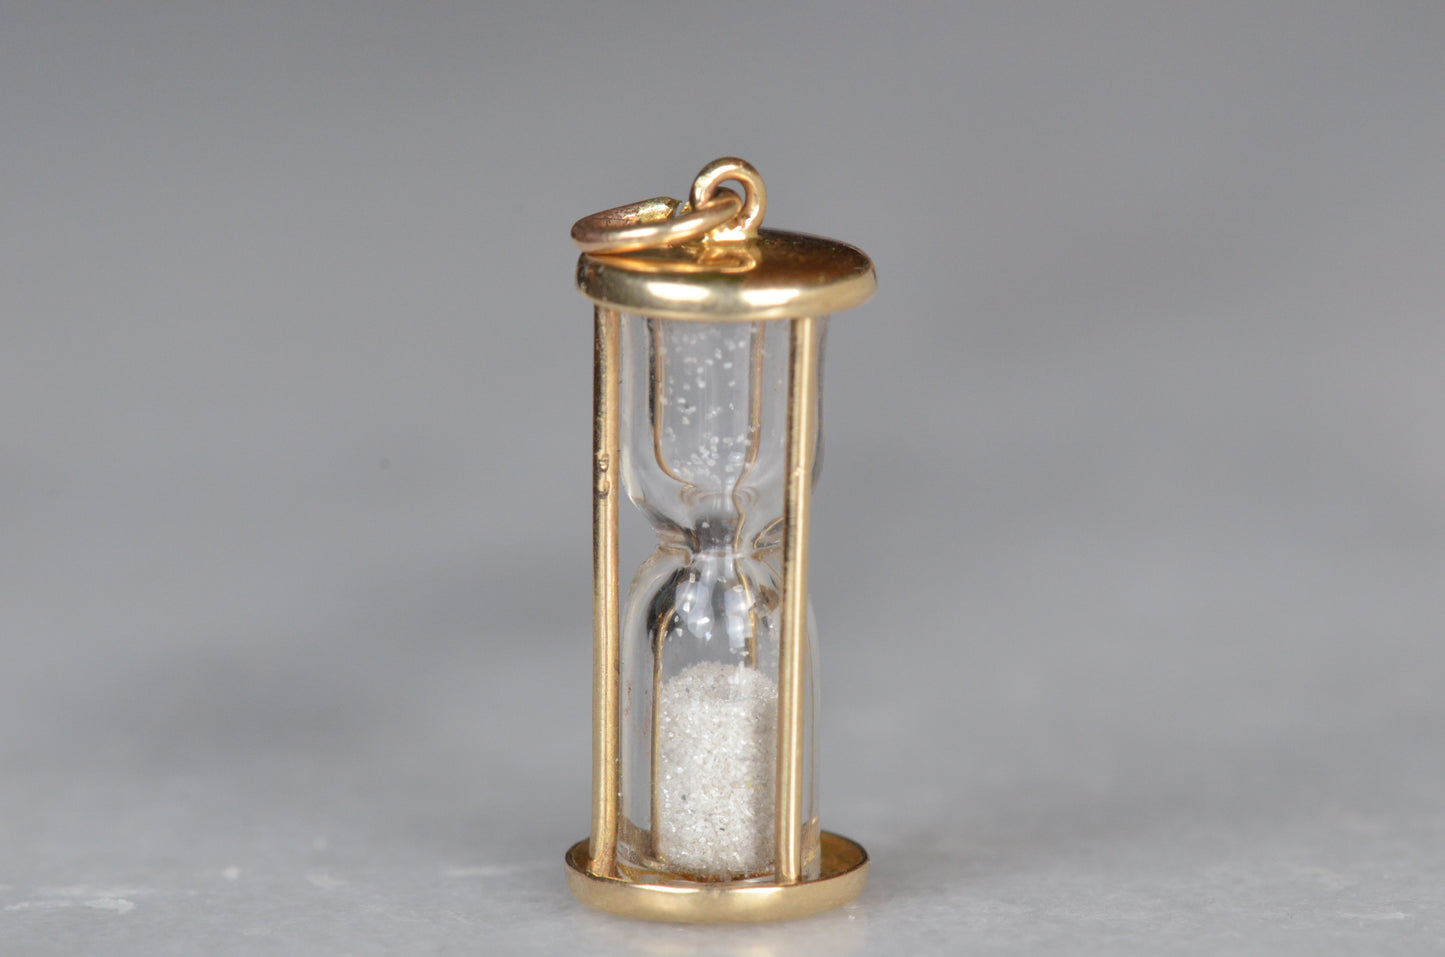 Silver Sands Vintage Hourglass Charm